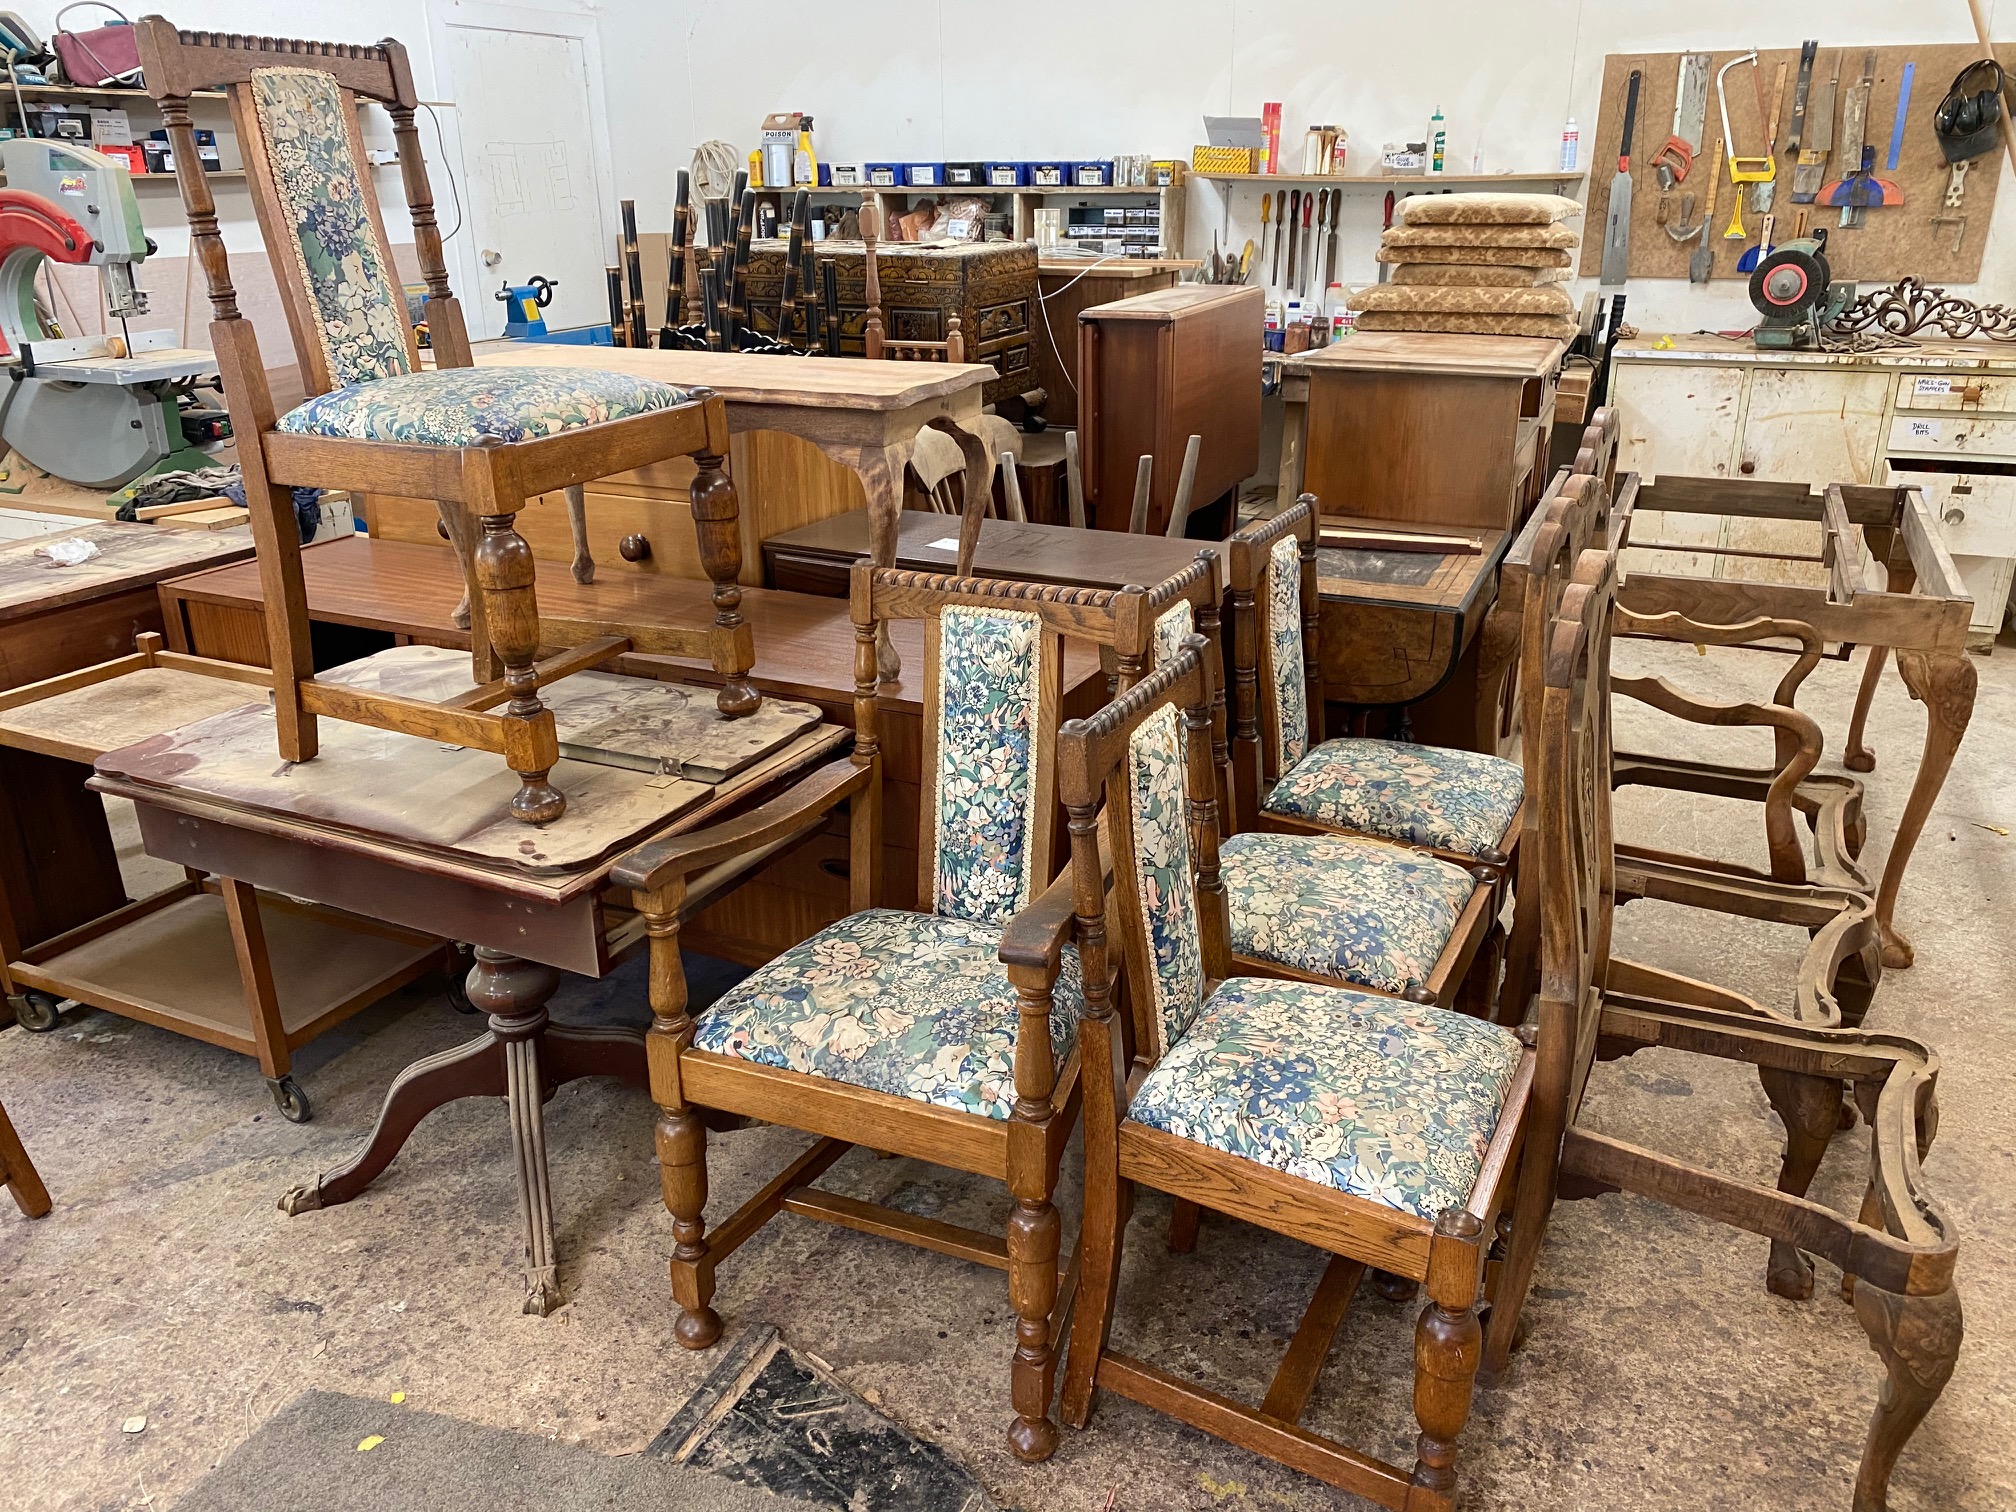 A collection of furniture that is in the process of being restored and repaired in the Kilmister Furniture Restoration workshop.